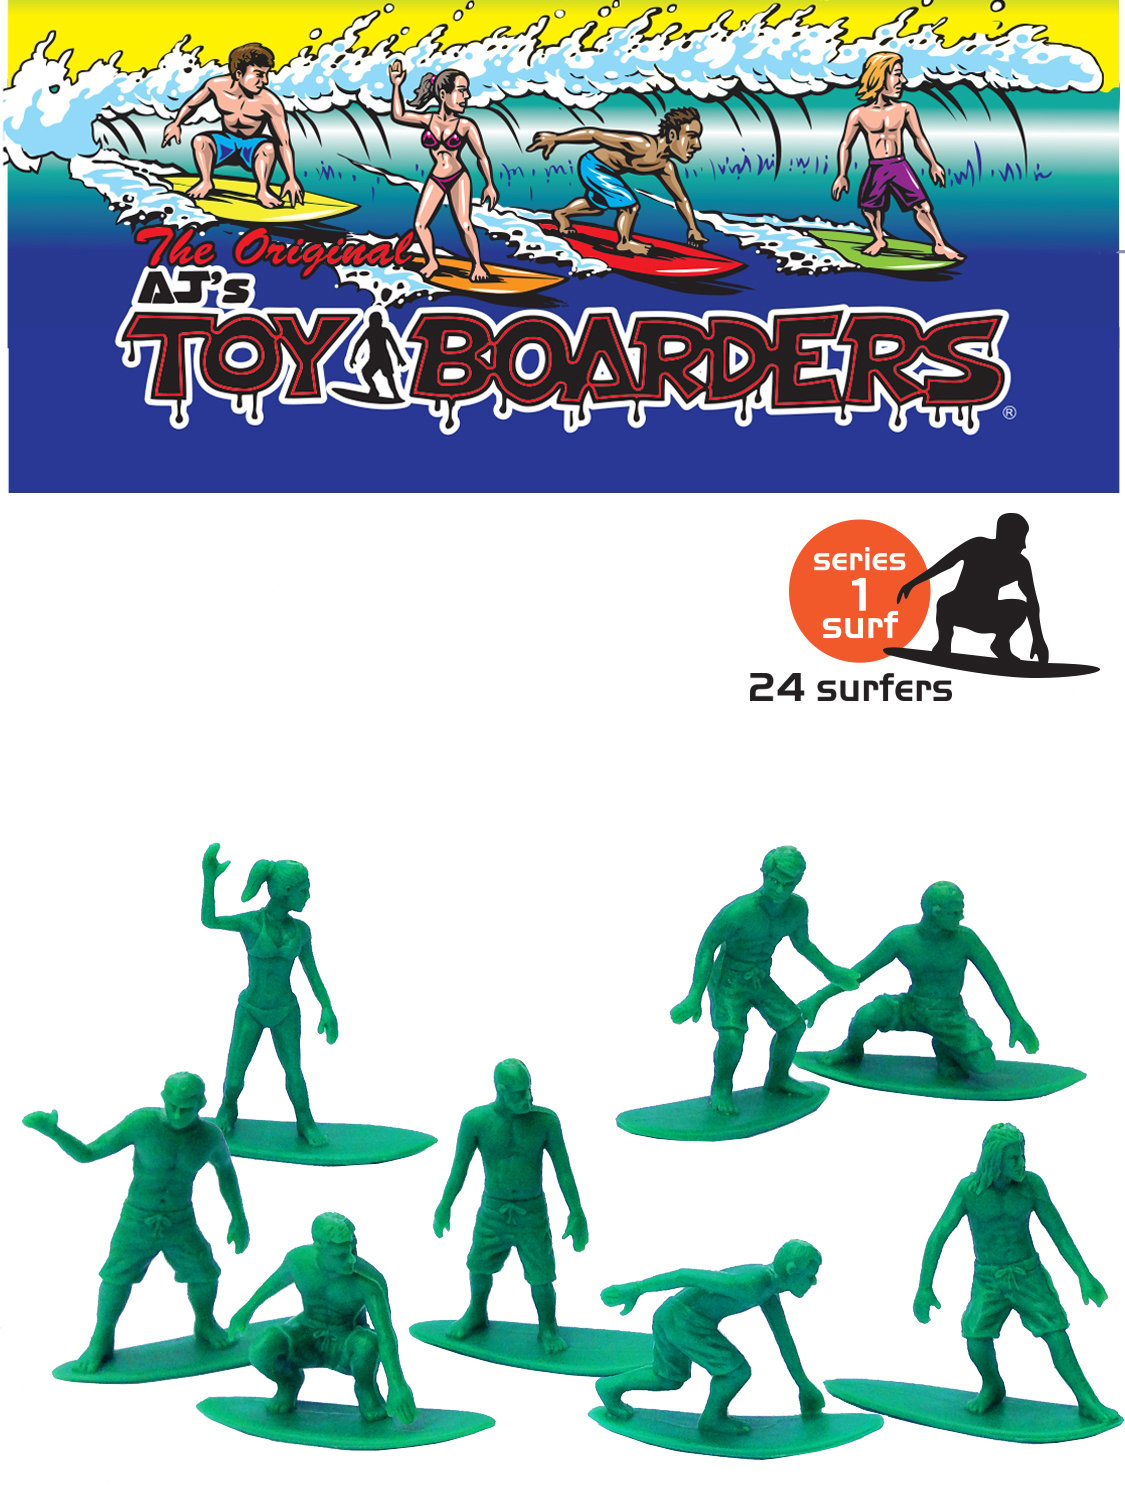 AJ's Toy Boarders — Products